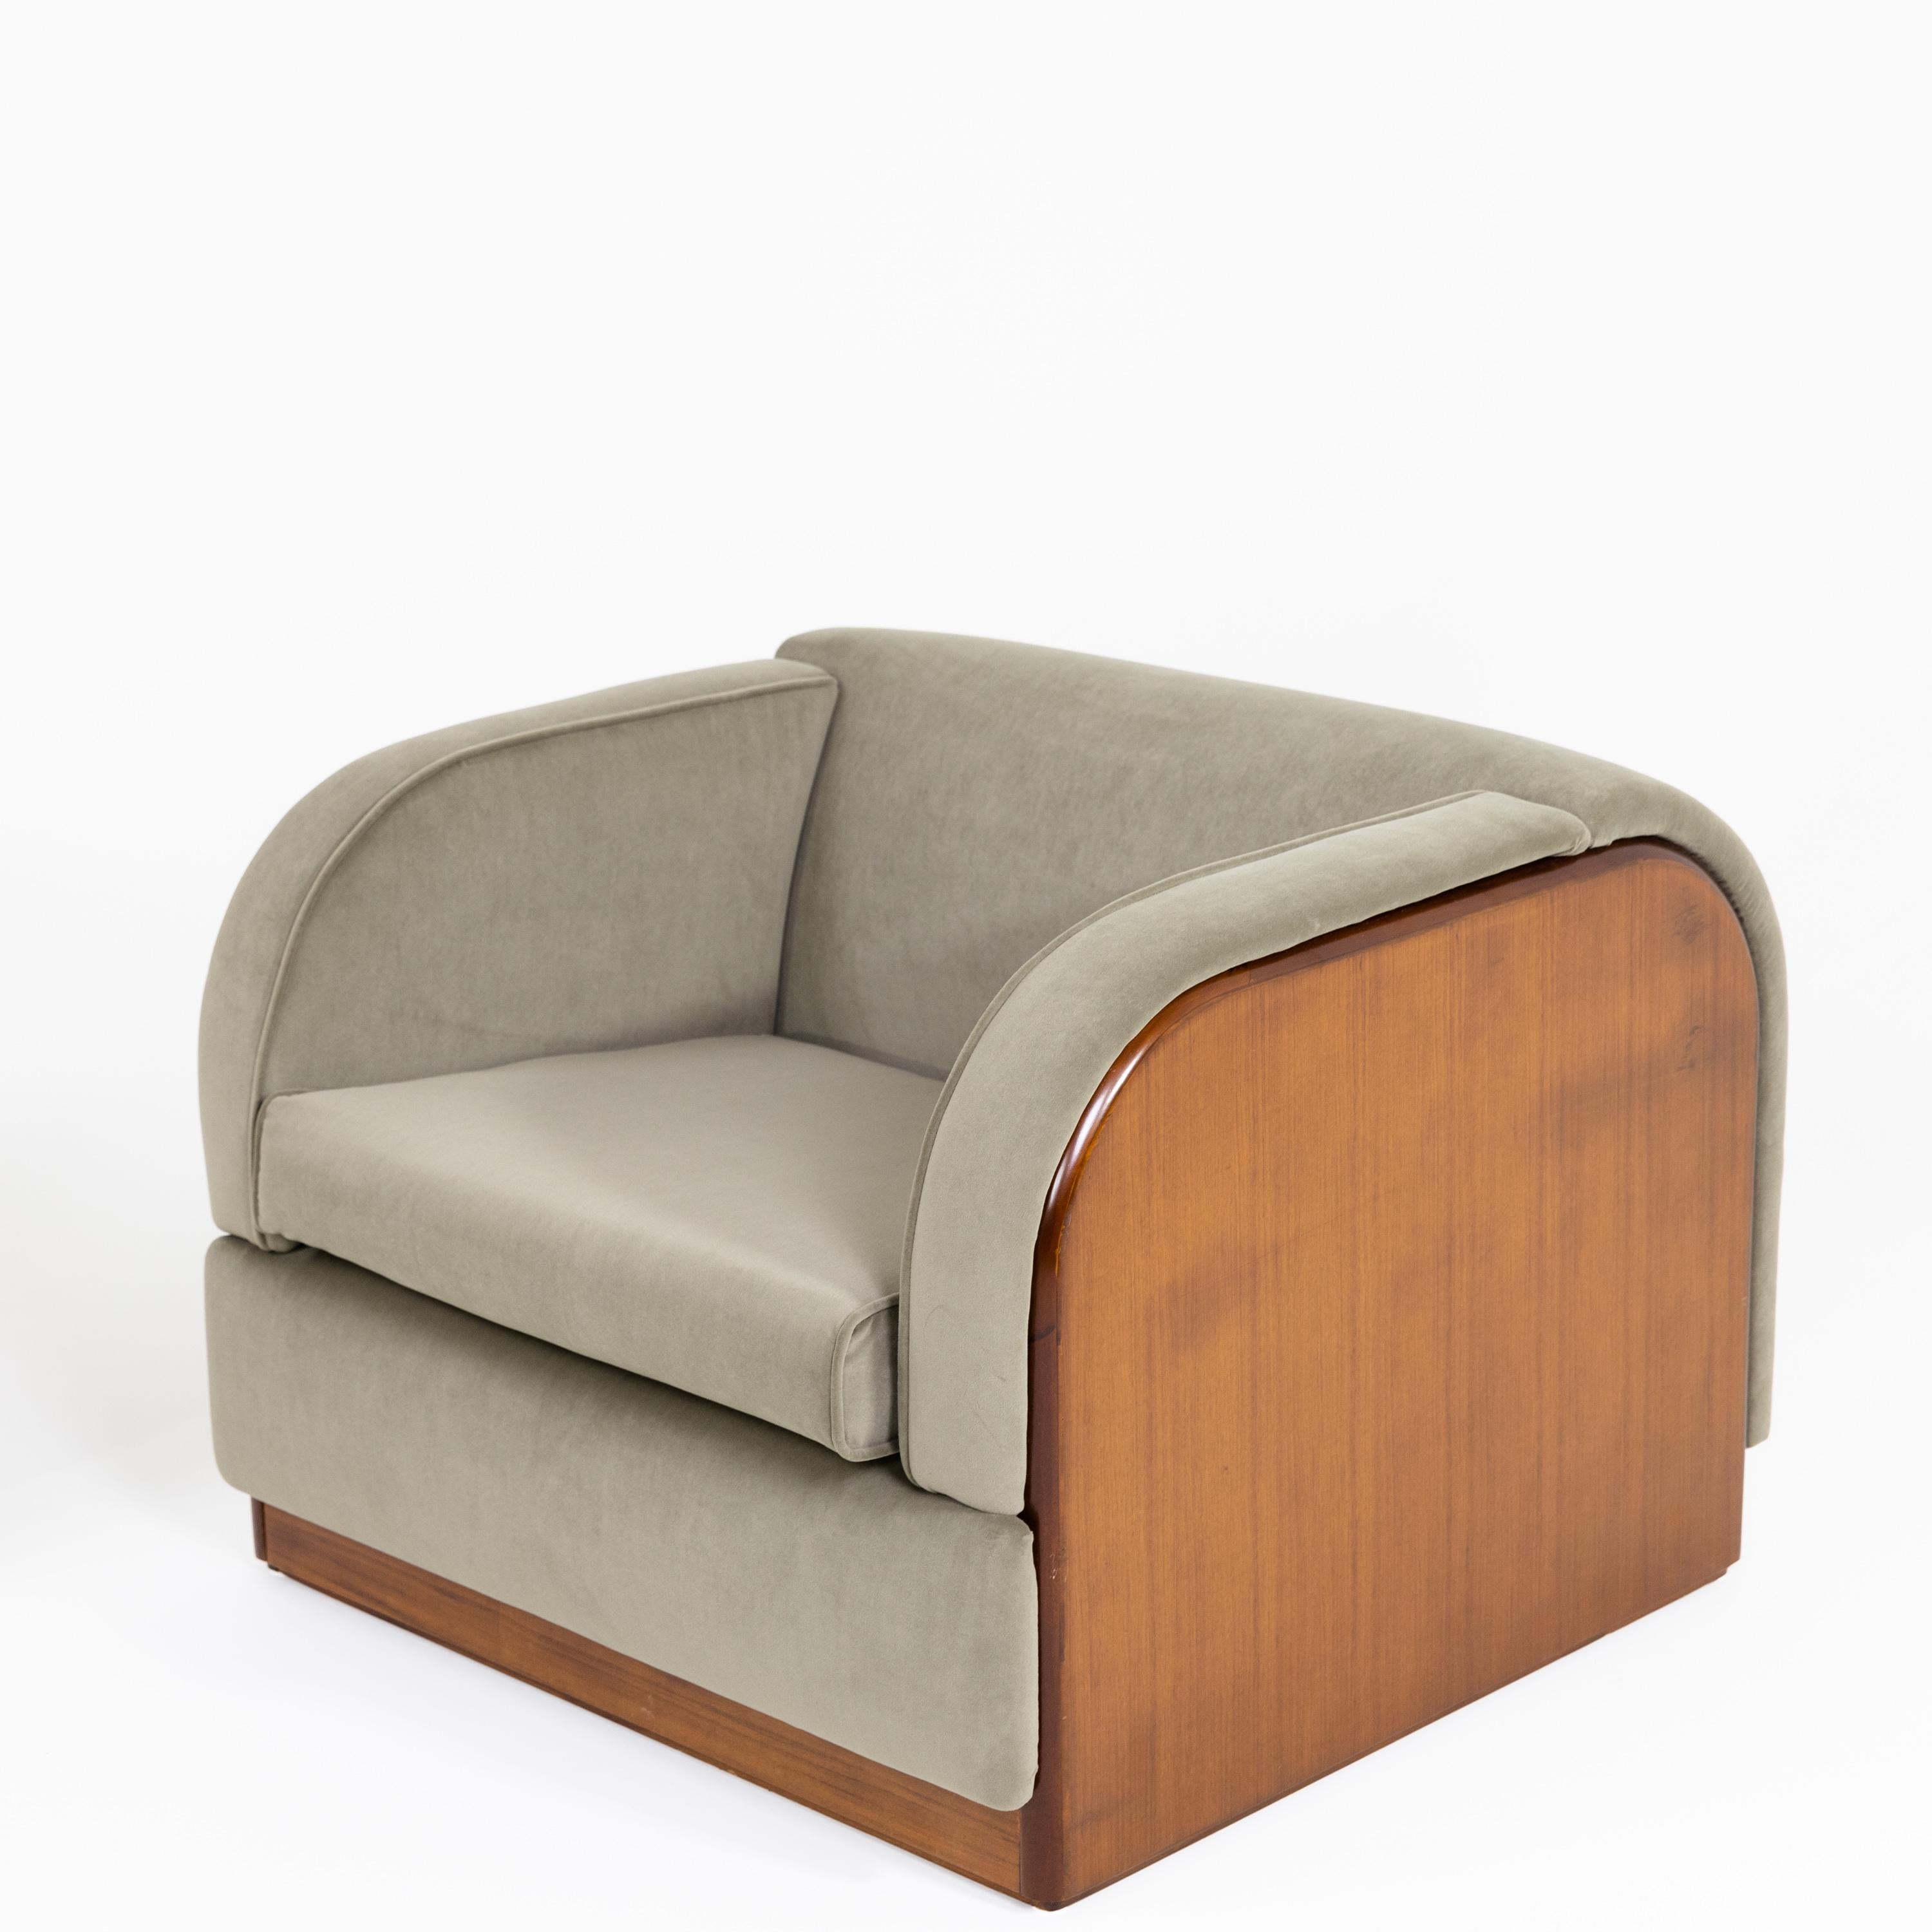 Mid-20th Century Modernist Lounge Chairs, Probably Italy, 1940s